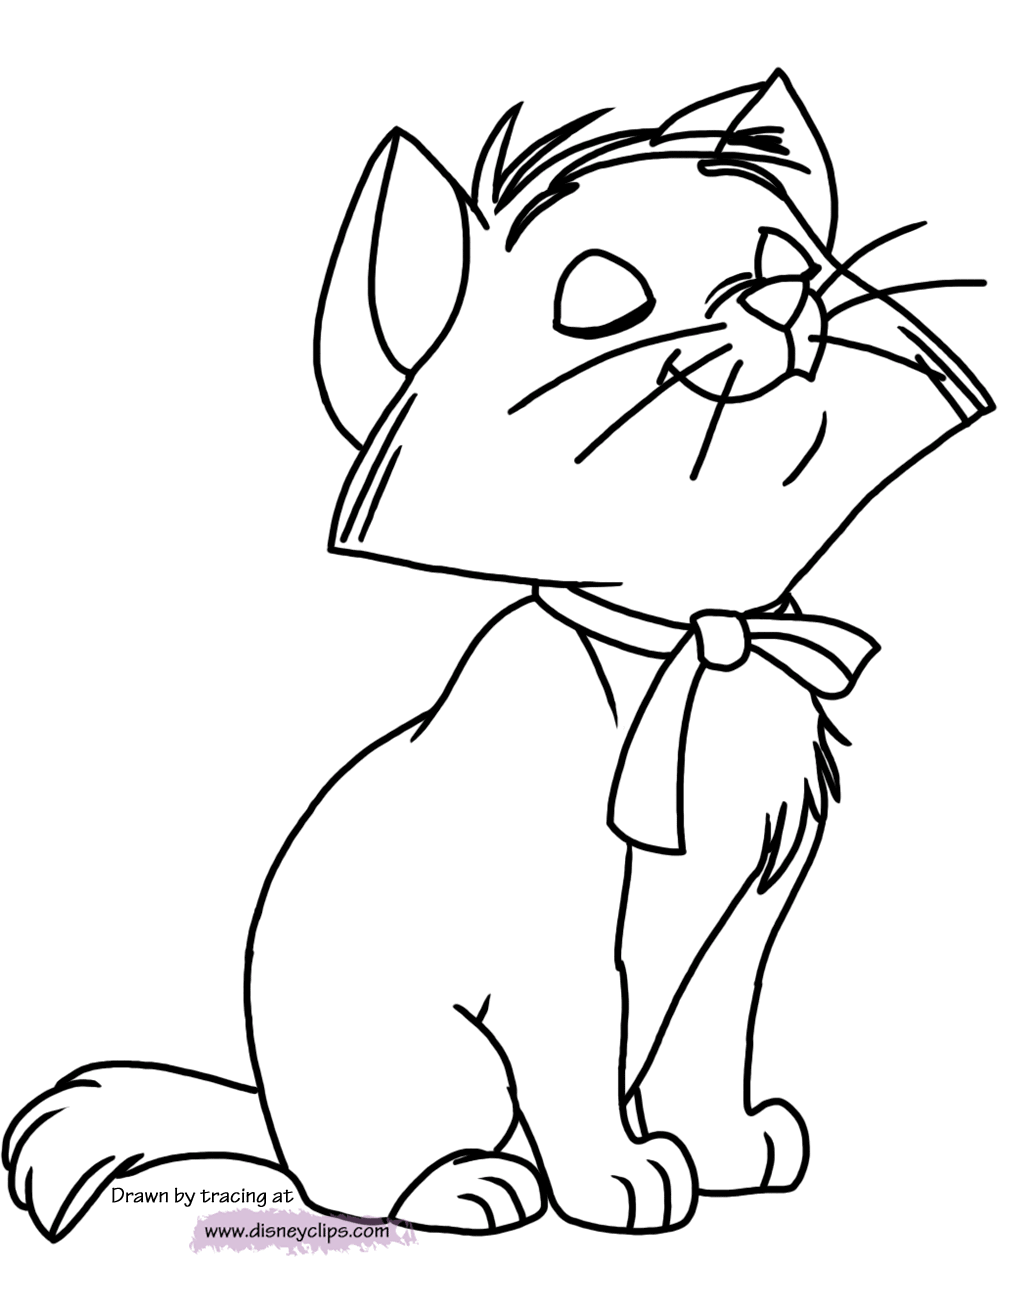 18 Inspirational 3 Little Kittens Coloring Pages - Wallpaper